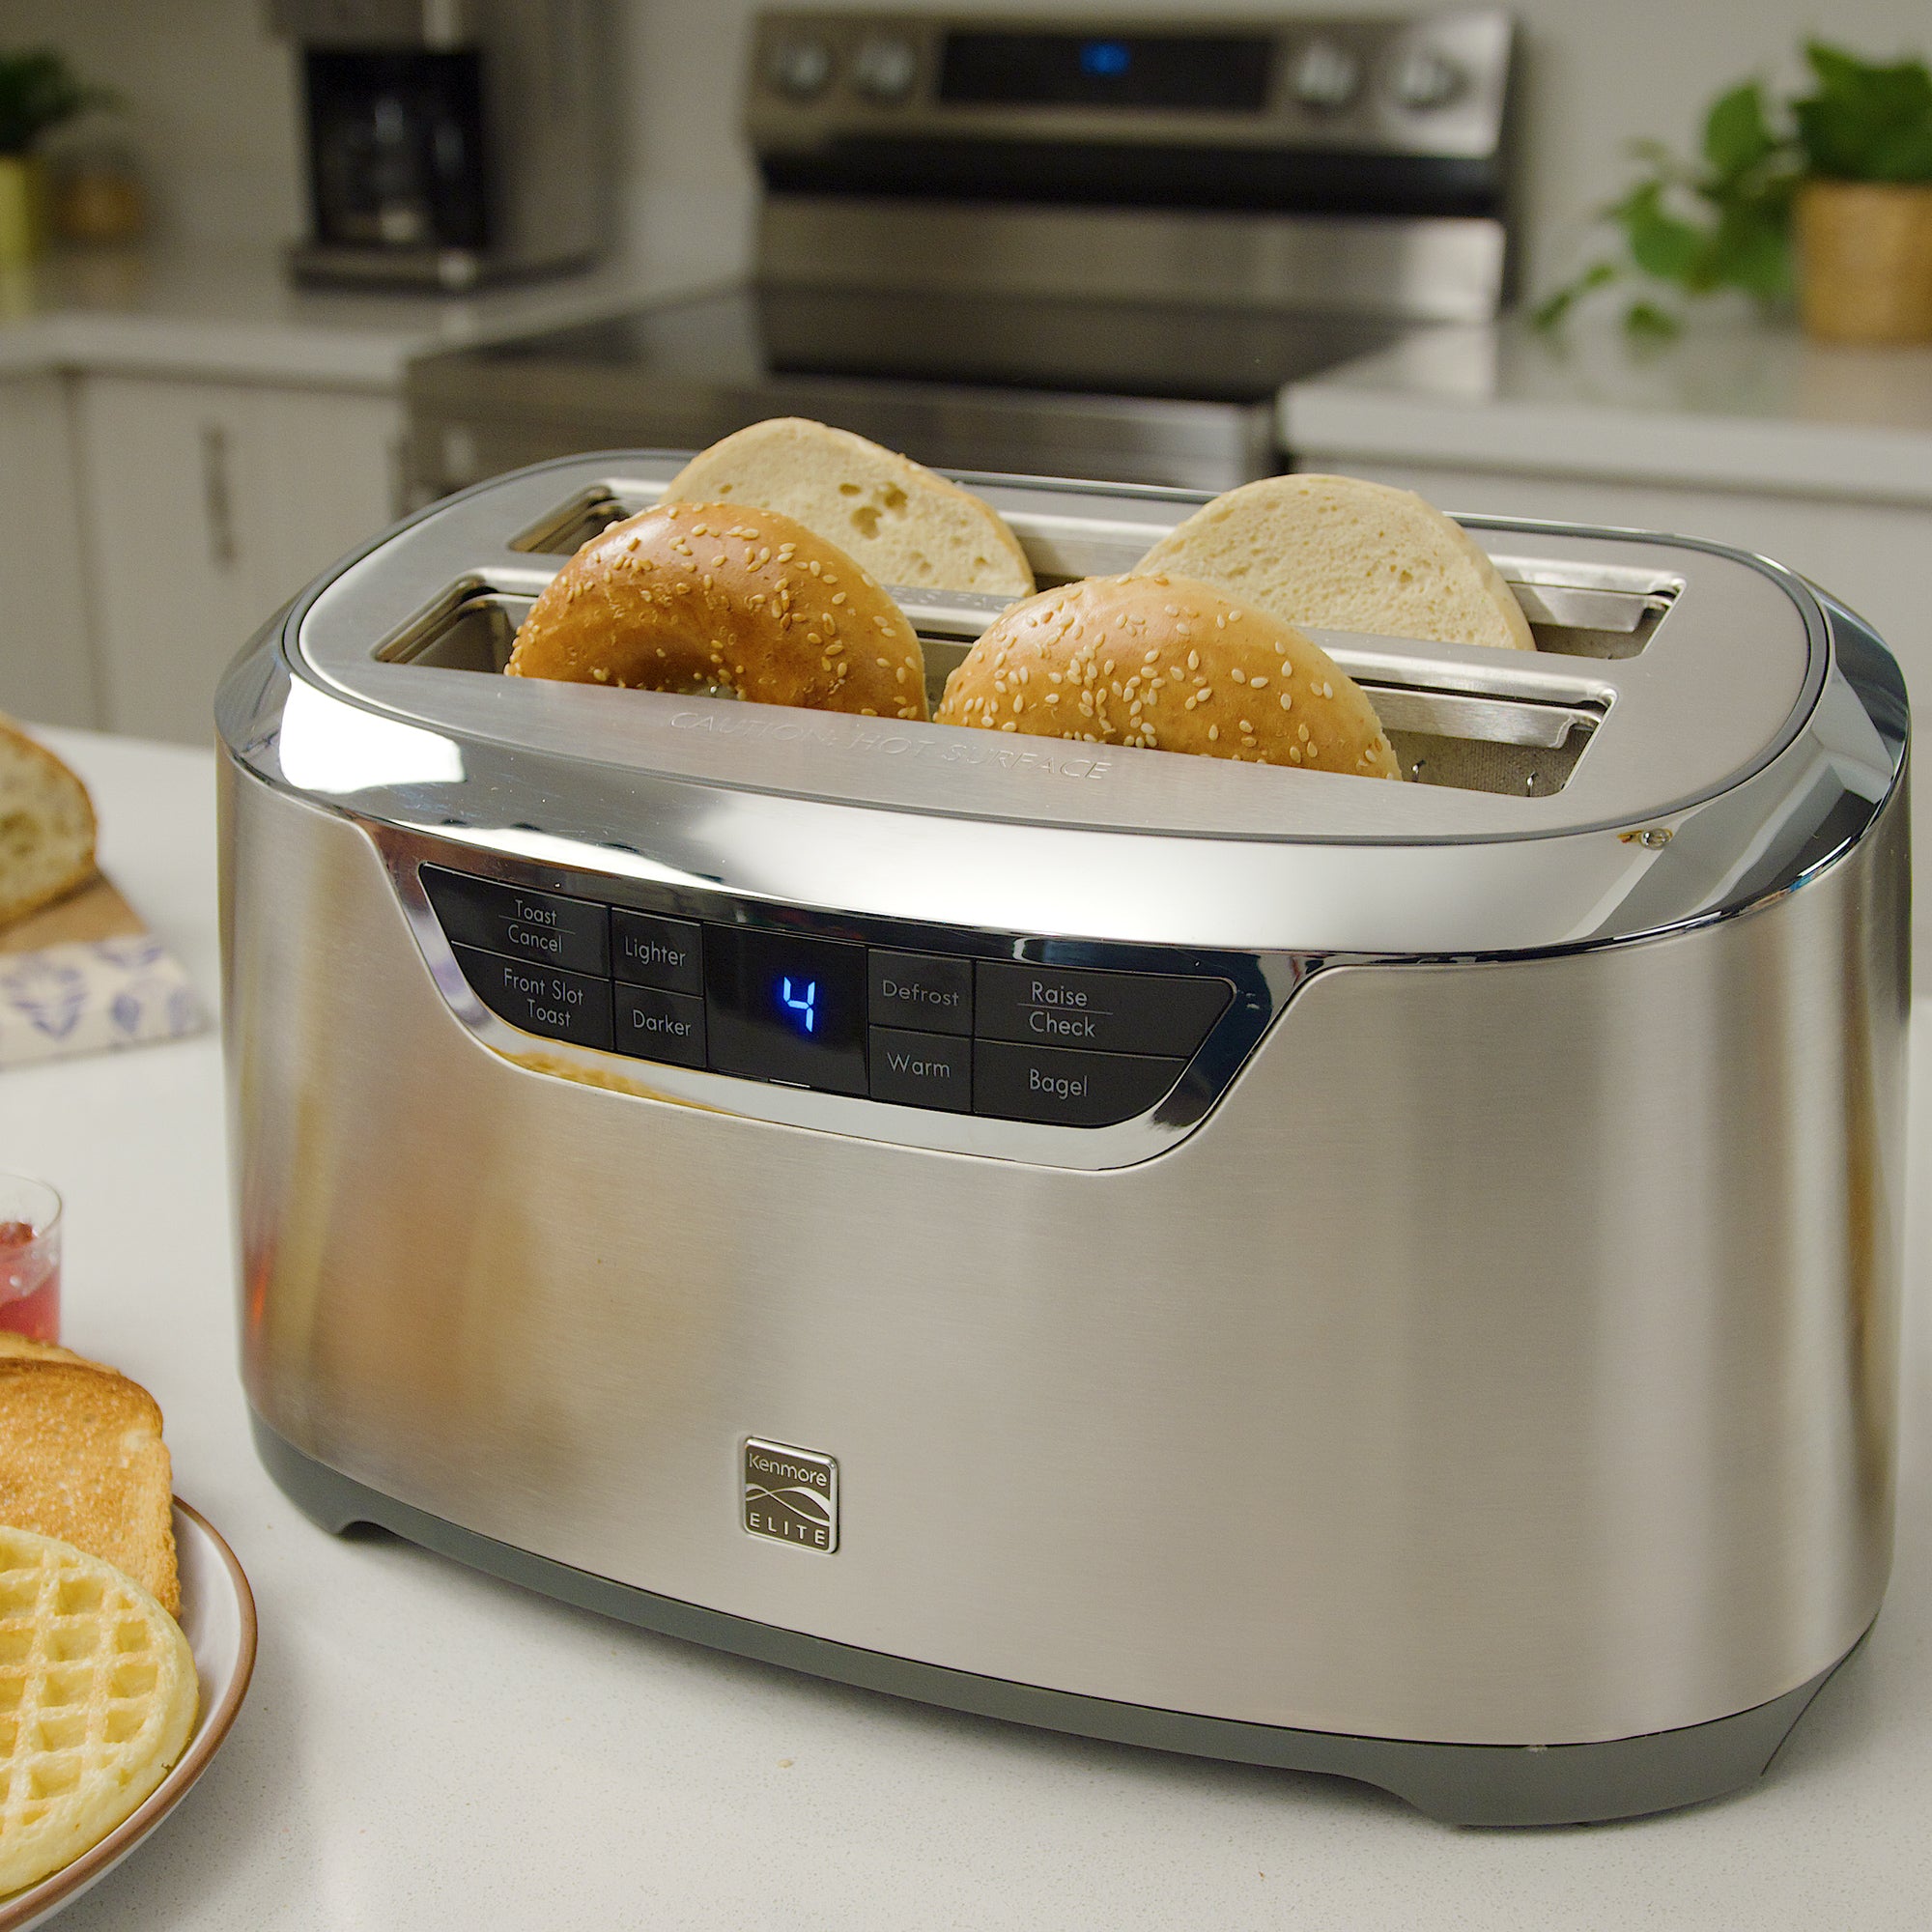 Kenmore Elite long slot stainless steel toaster with four toasted bagel halves inside on a light gray countertop with a stainless steel stove and potted plant in the background